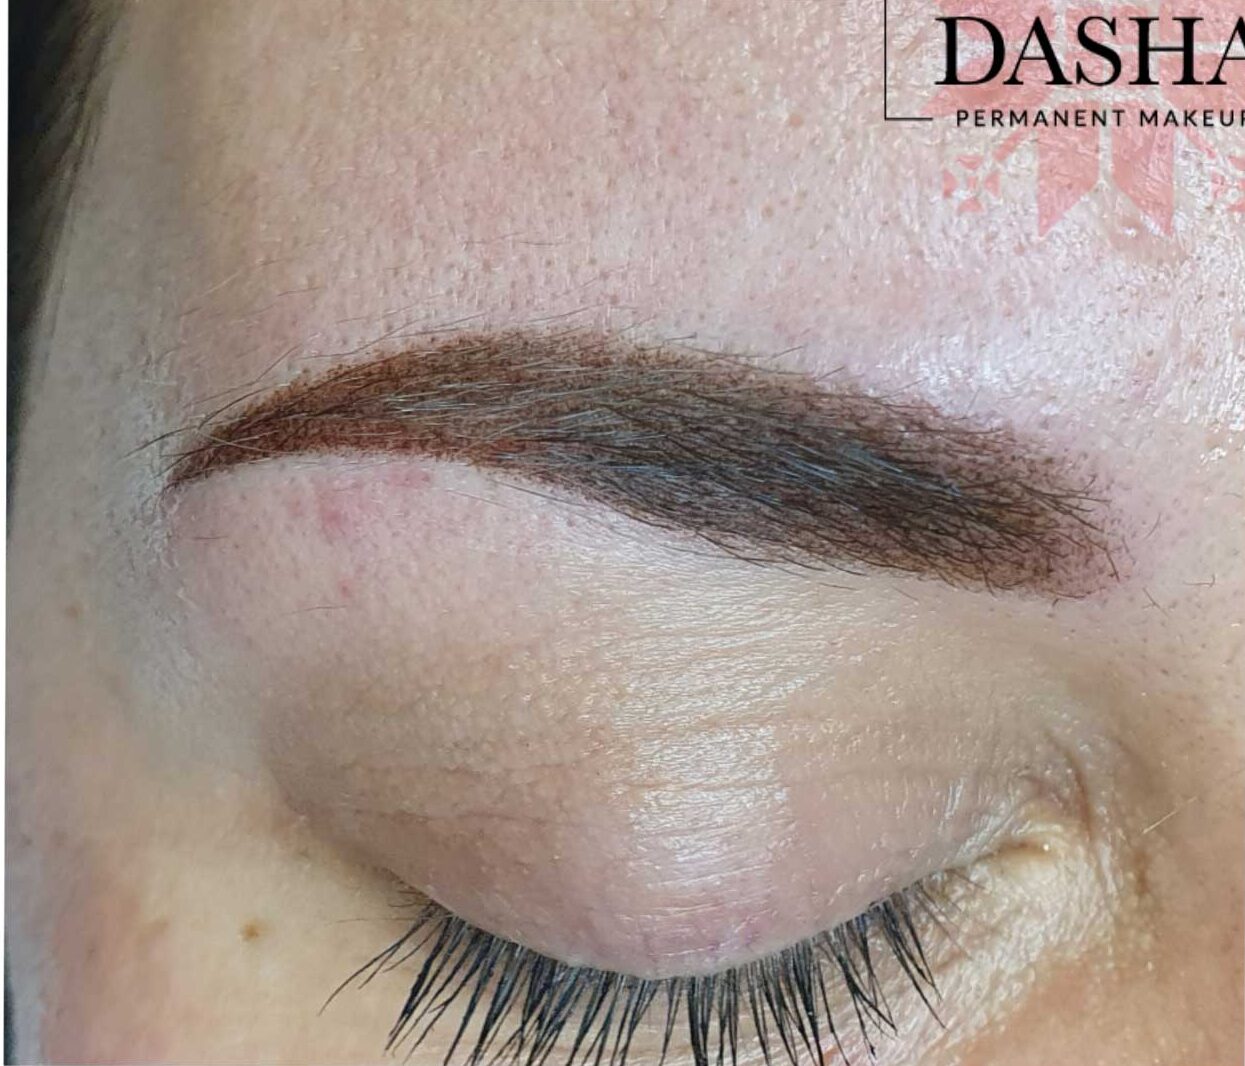 Eyebrows Cosmetic Tattoo. Cosmetic and Mediical Tattoo by Dasha. Permanent makeup and reconstructive tattoo, scalp micro-pigmentation in Christchurch, New Zealand